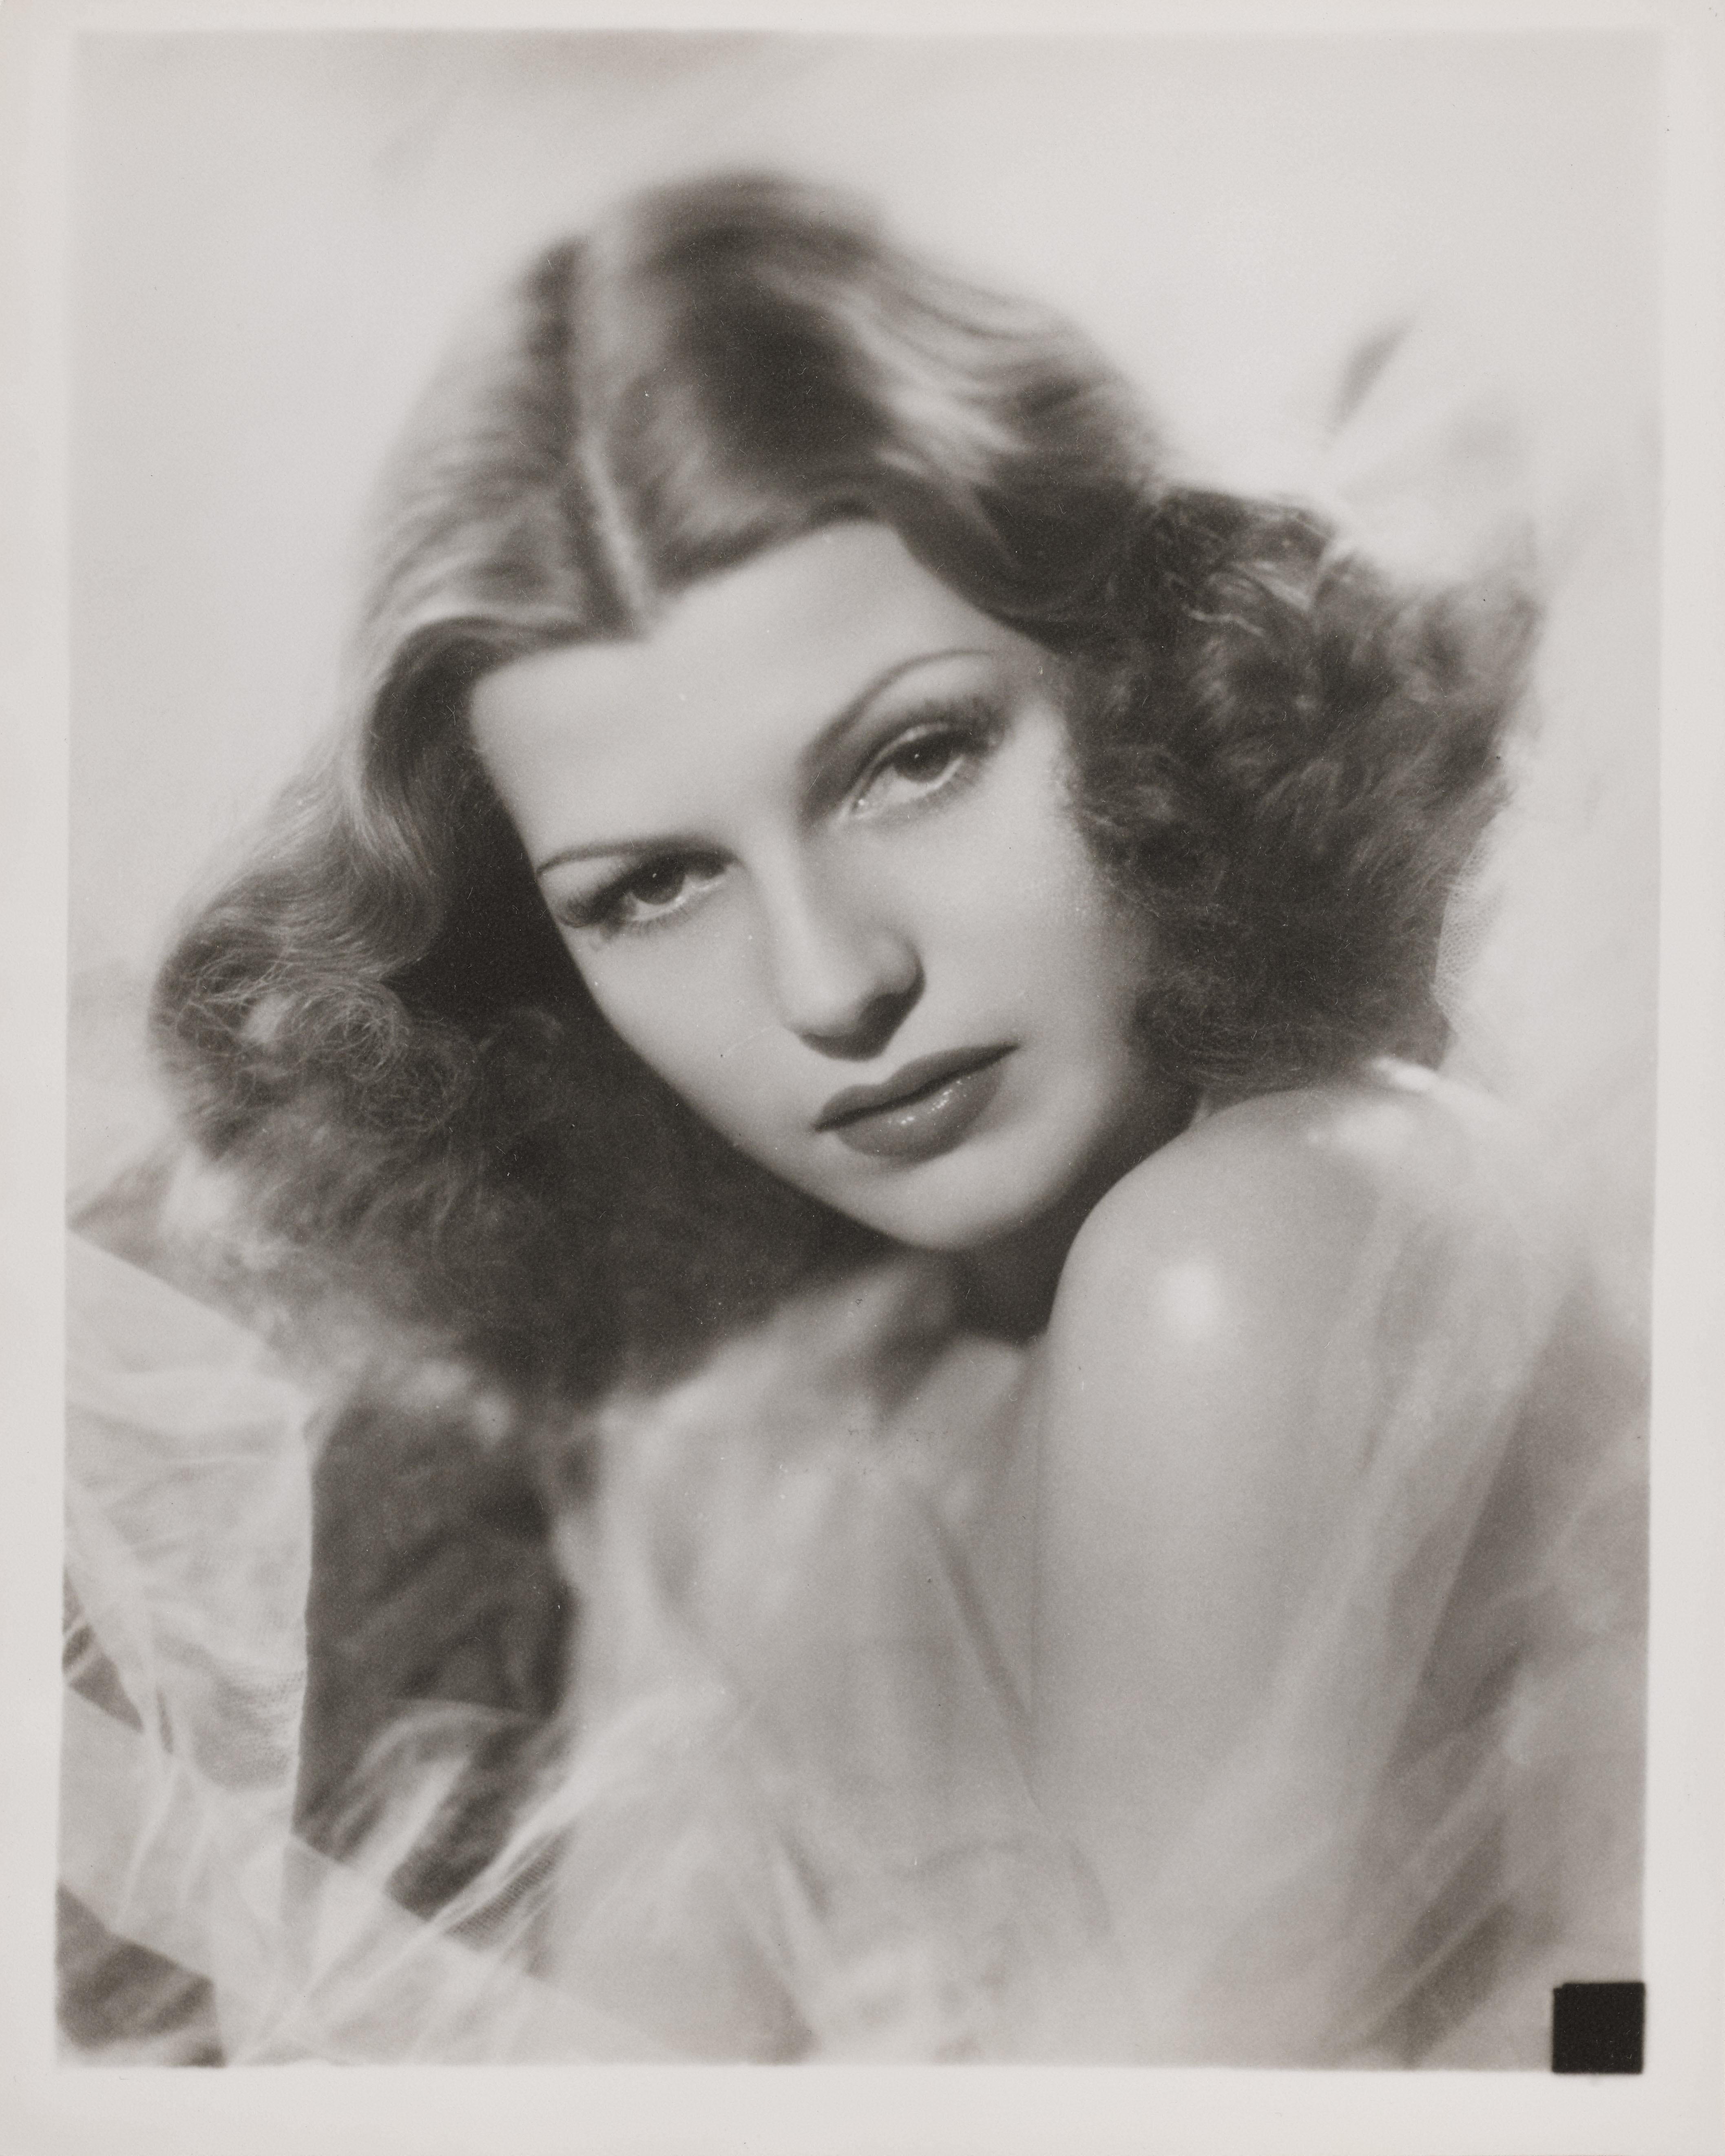 Original Rita Hayworth portrait photo. This is a silver gelatin, double weight satin photograph from 1940s. This piece would be shipped flat in strong card.